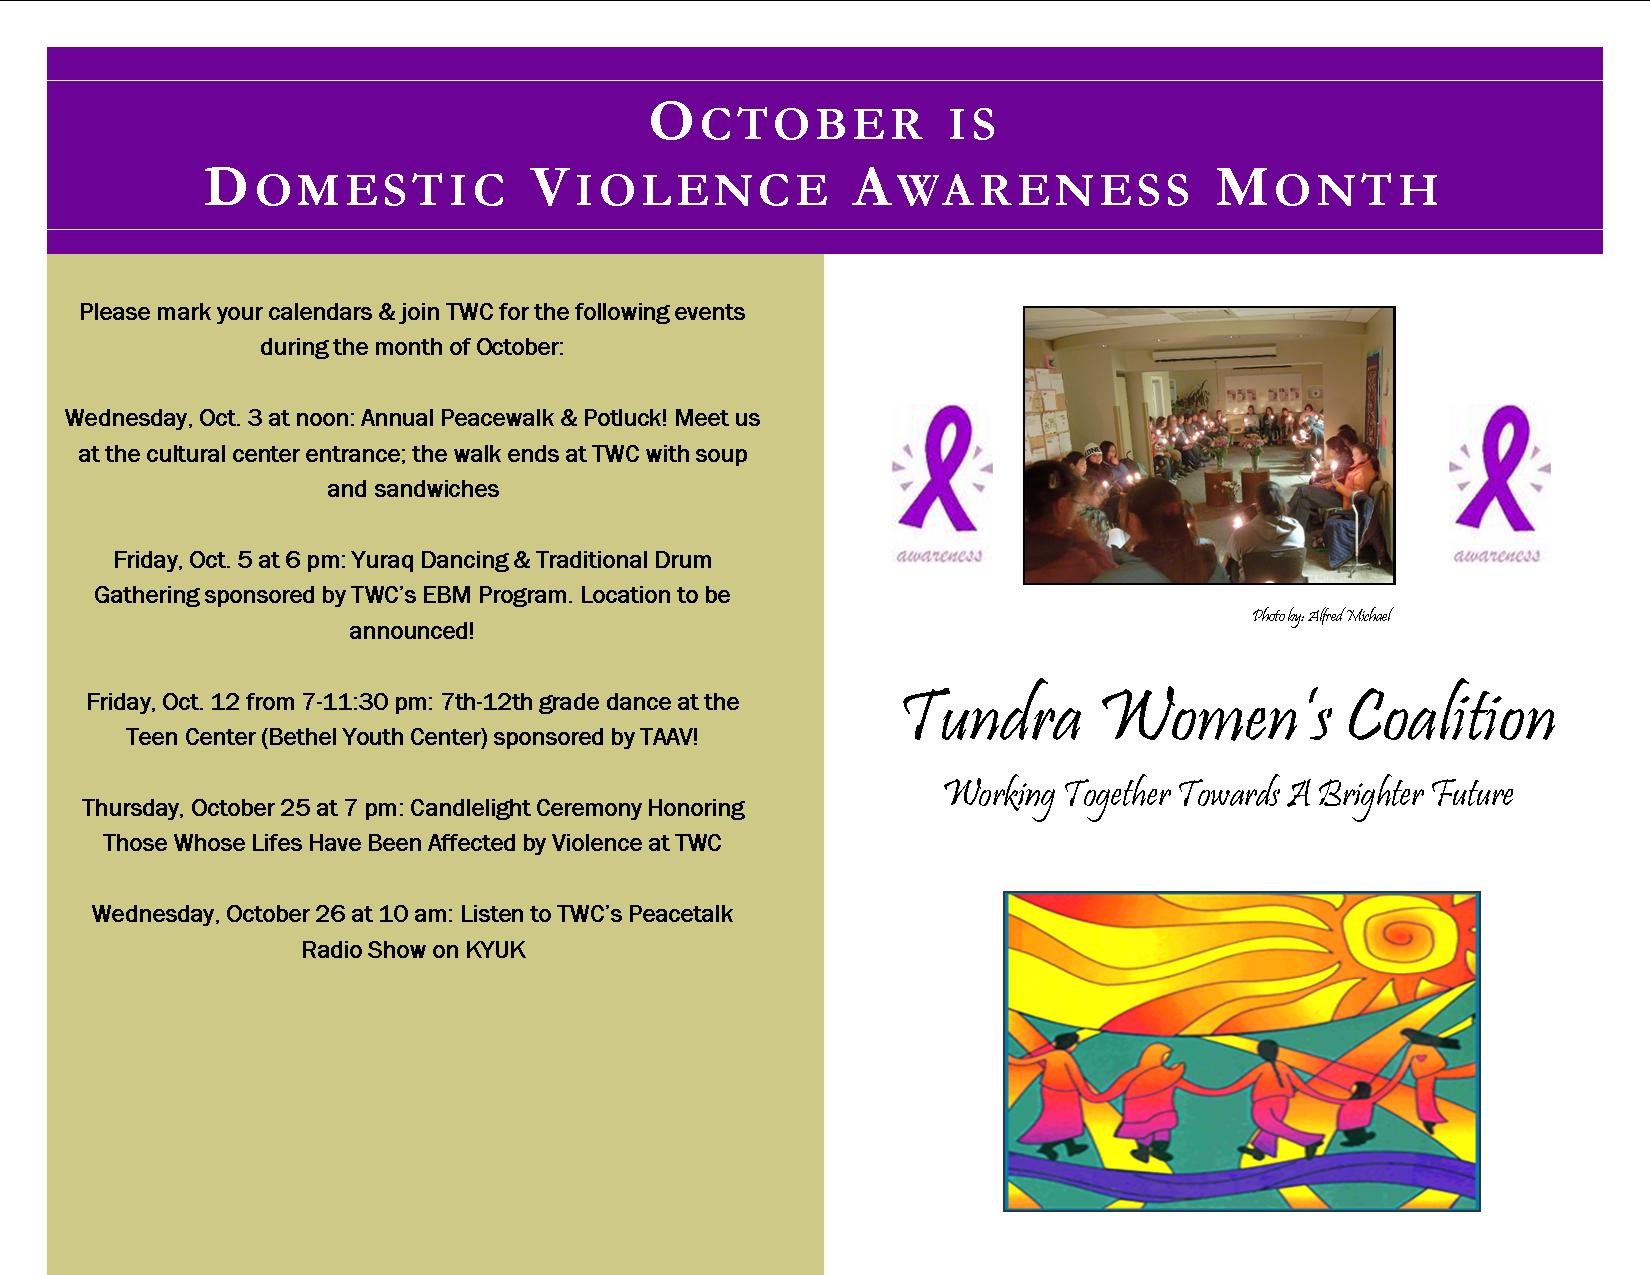 Domestic Violence Awareness Month, 2012